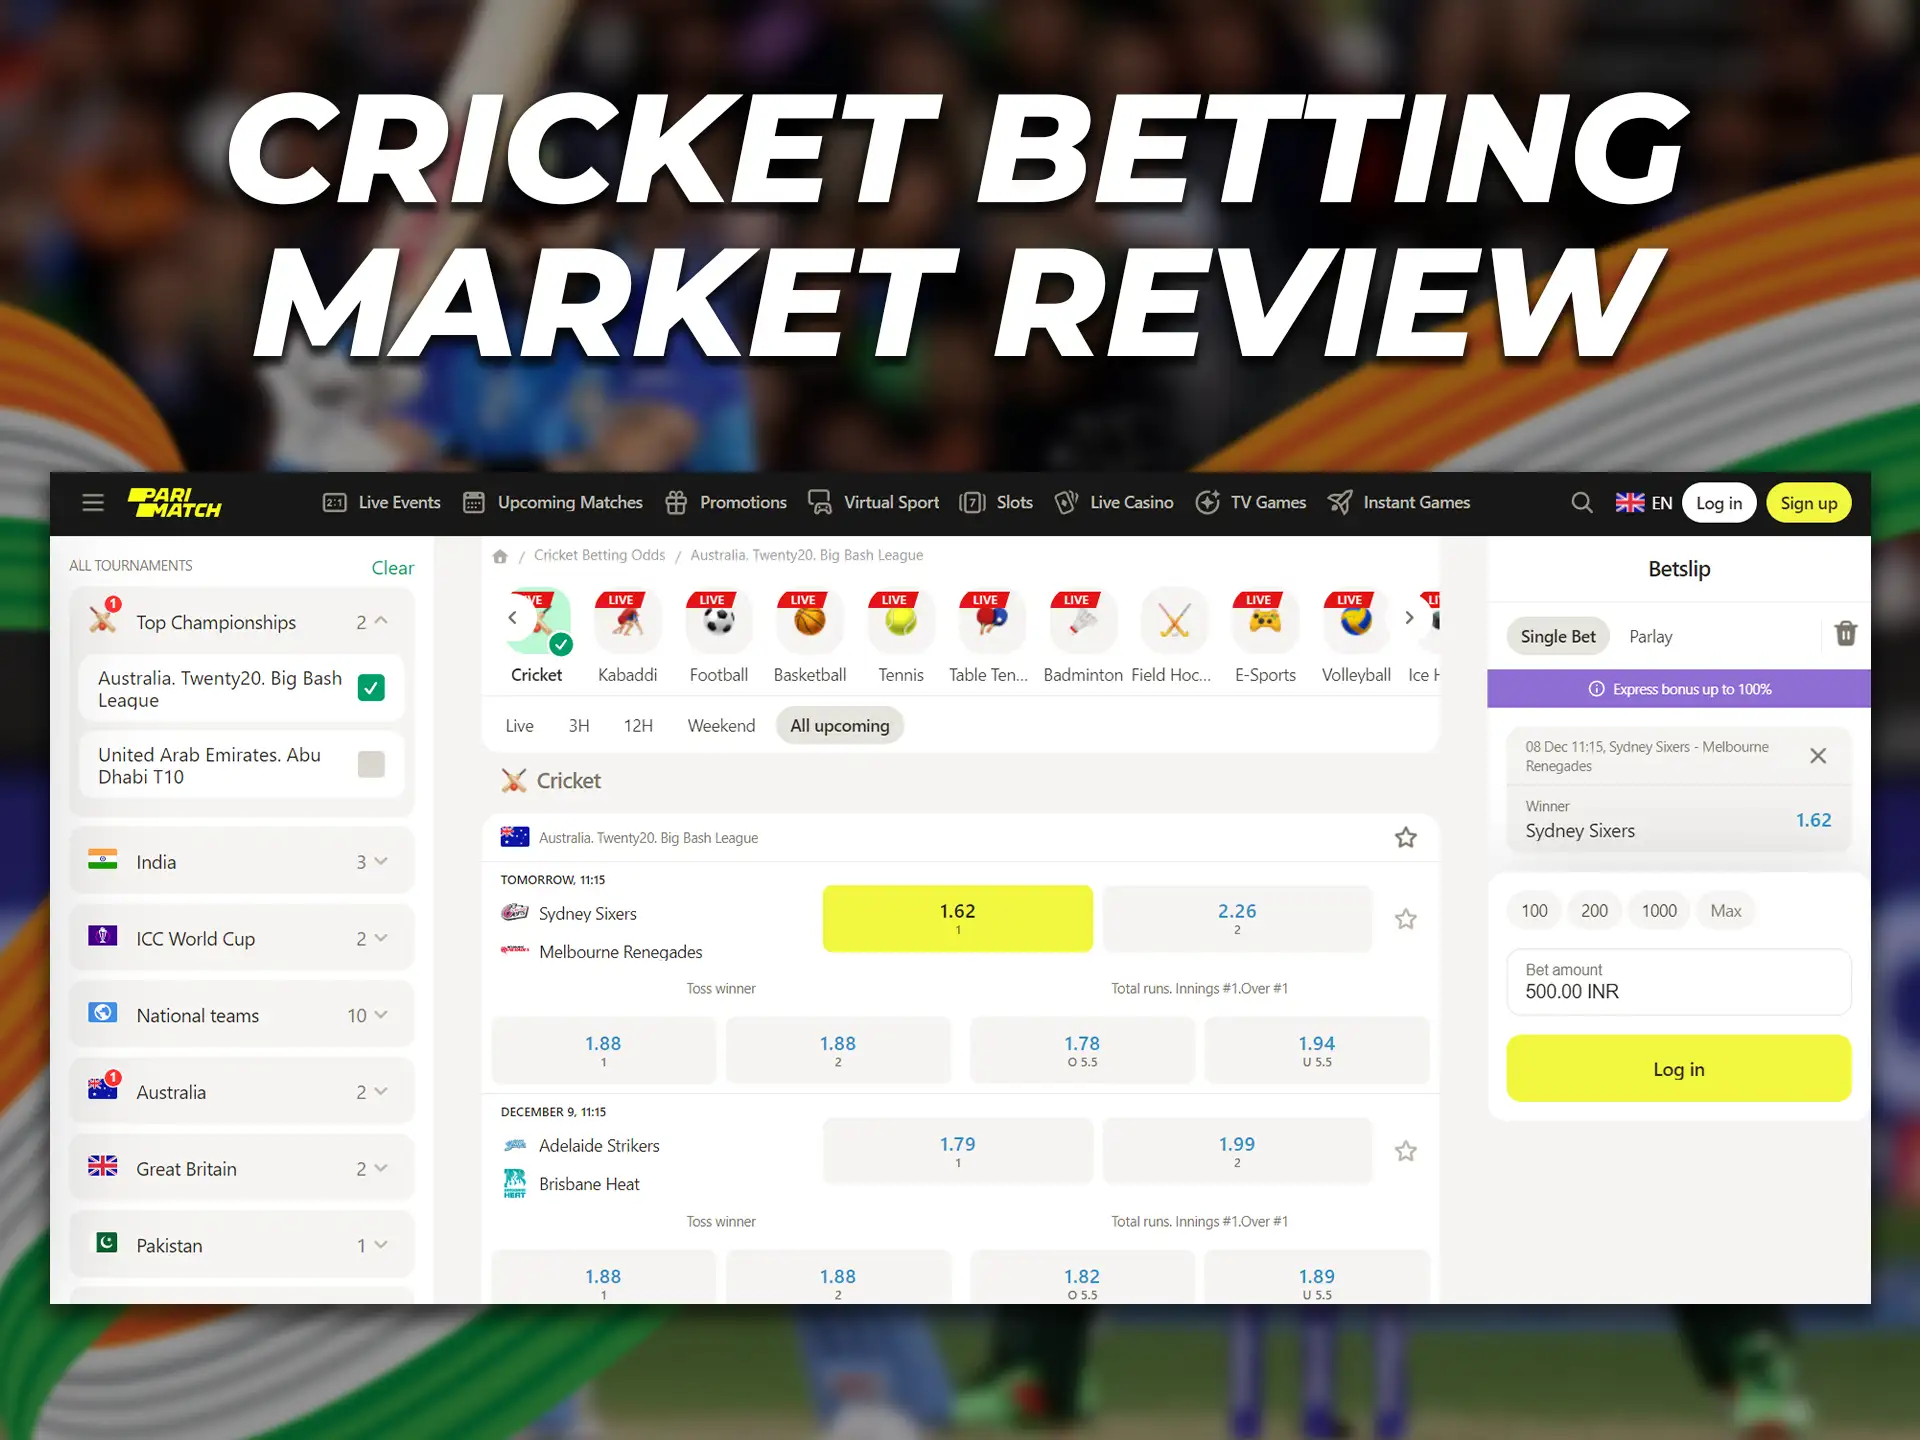 To place a bet there are many interesting markets to choose from for Indian players.